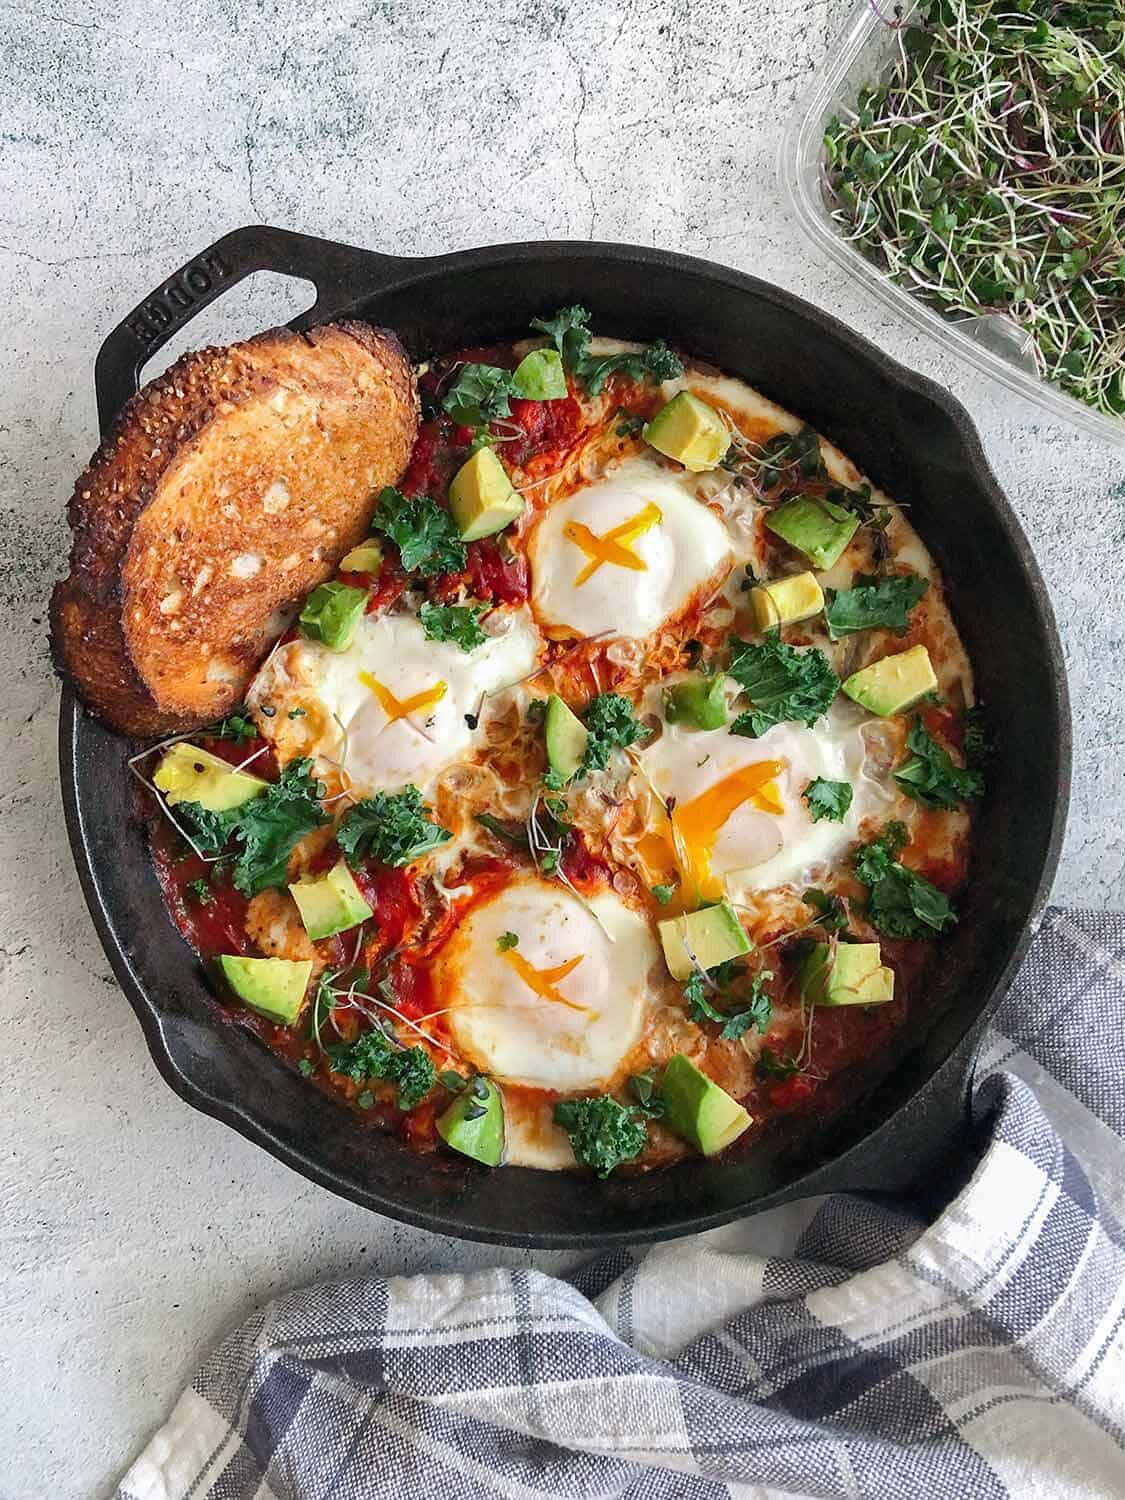 Been way too long since I’ve made shakshuka and every time I wonder “what is wrong with me?” And “why did it take me this long to make again?” Such a satisfying savory breakfast and so easy to make!v The perfect Sunday brunchin’ ☀